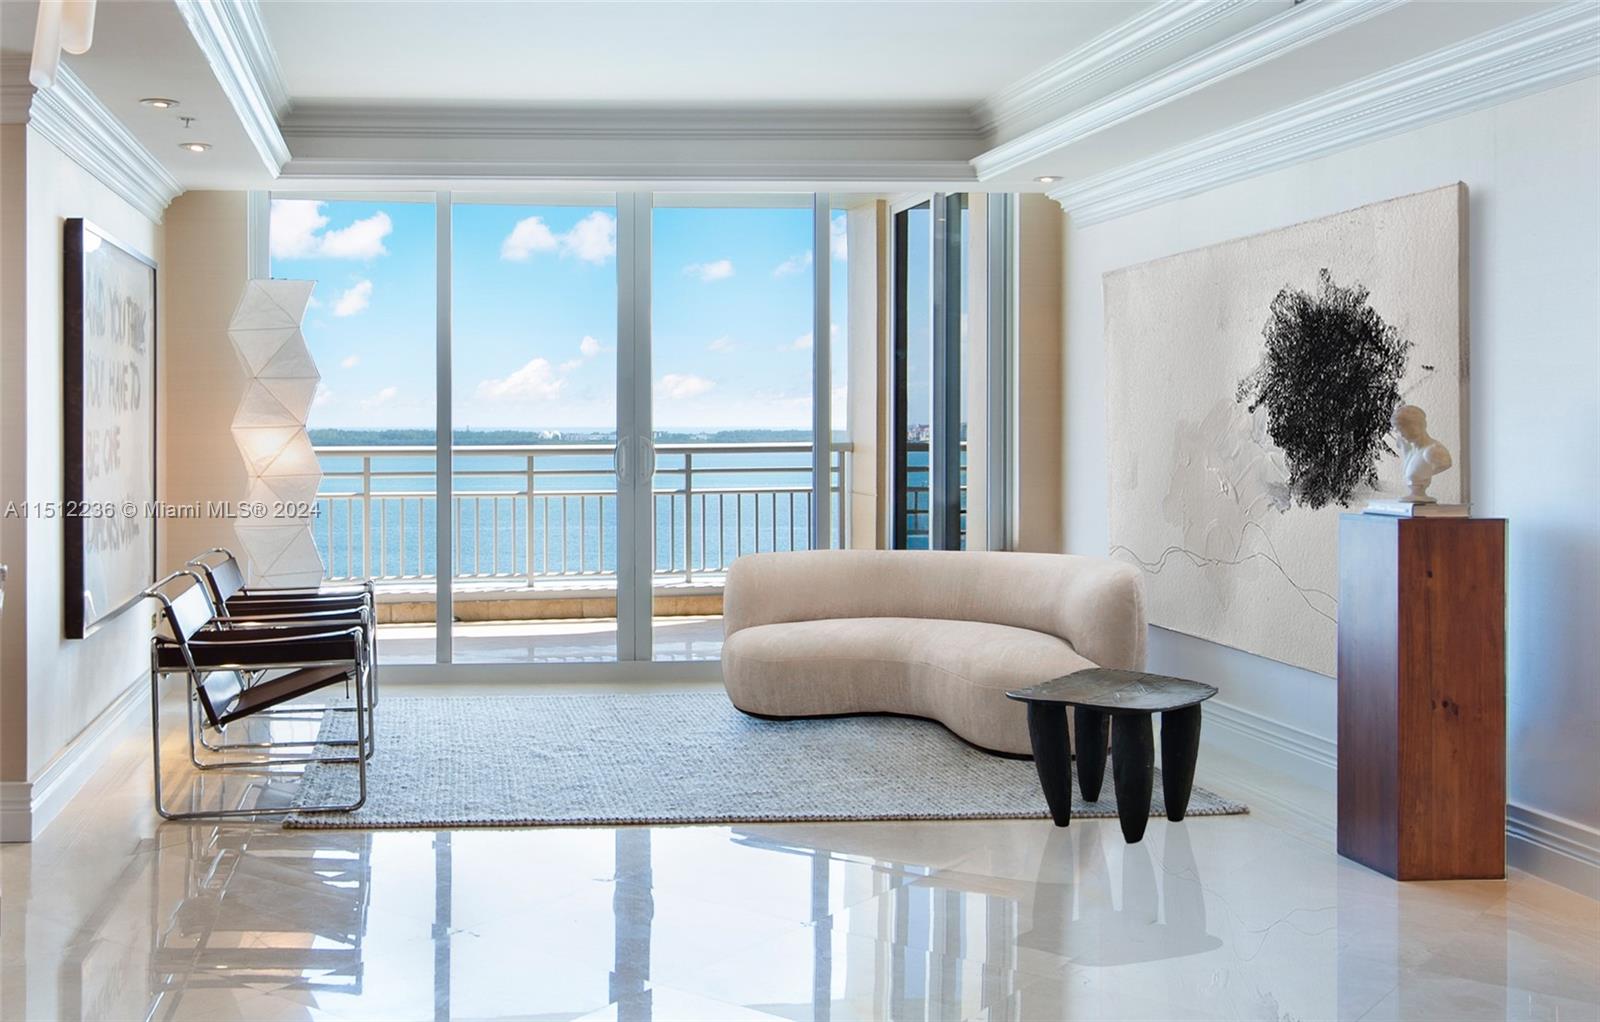 Elegance meets serenity in this meticulously reimagined 2 bed/2.5 bath condo with unobstructed ocean views. Step through the custom MOLON Rosewood doors with palisander inlays into a realm of refinement. The airy layout, adorned with light-hued marble floors, German silk wallpaper and bespoke lighting throughout, embodies luxury. A chef's dream, the French-inspired kitchen boasts high-end appliances. Unwind in the sprawling Primary Suite with its walk-in closet and lavish open-style bath. With craftsmanship that's second to none and panoramic ocean views that promise sunrise serenades and moonlit marvels, this residence is a true gem. Over $1M invested ensures unmatched quality. Welcome to your coastal sanctuary.